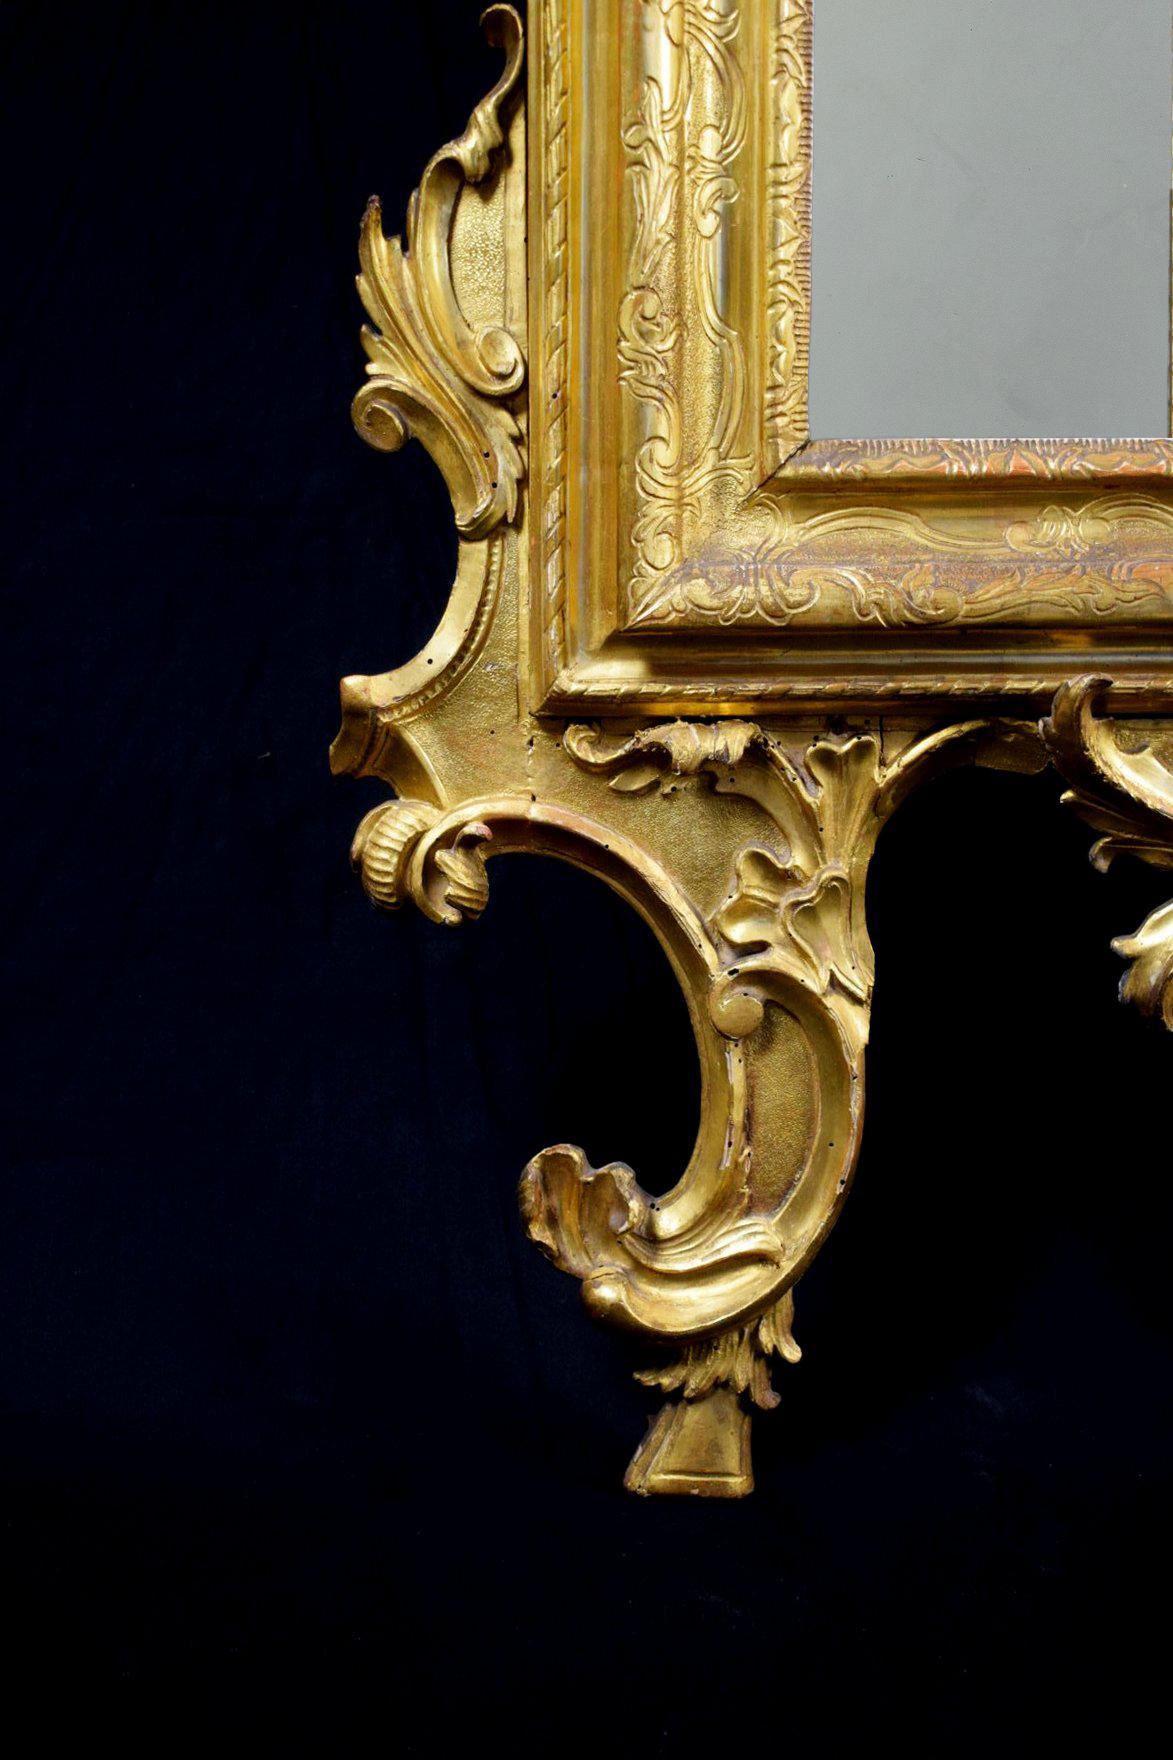 18th Century Venetian Carved and Giltwood Mirror For Sale 3